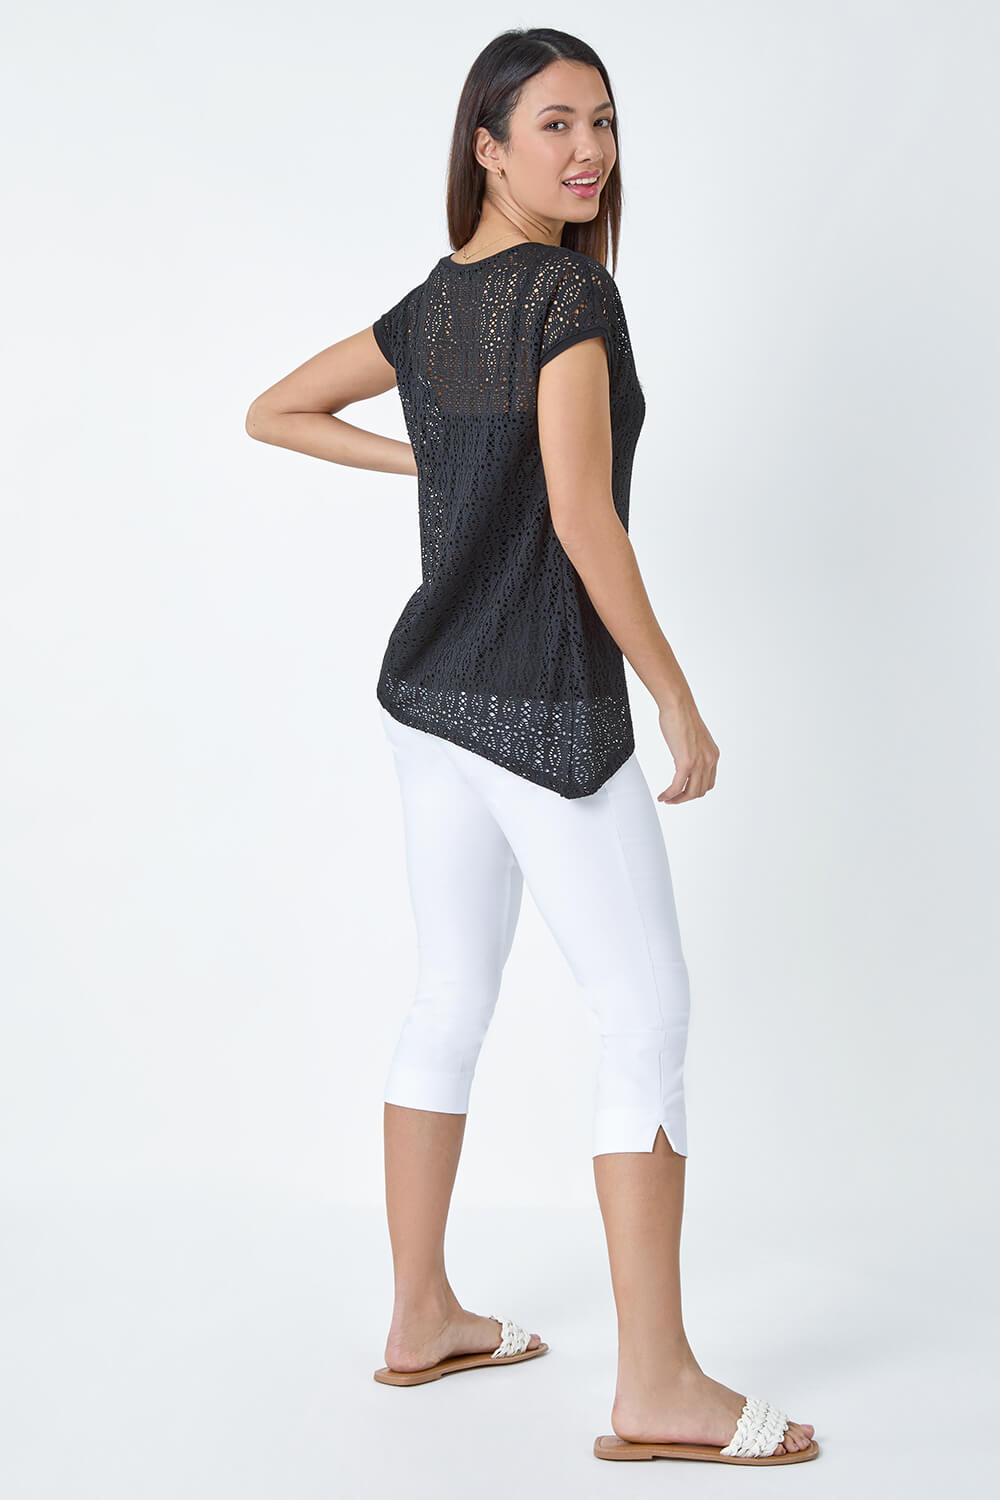 Black Crochet Overlay Stretch Top, Image 3 of 5